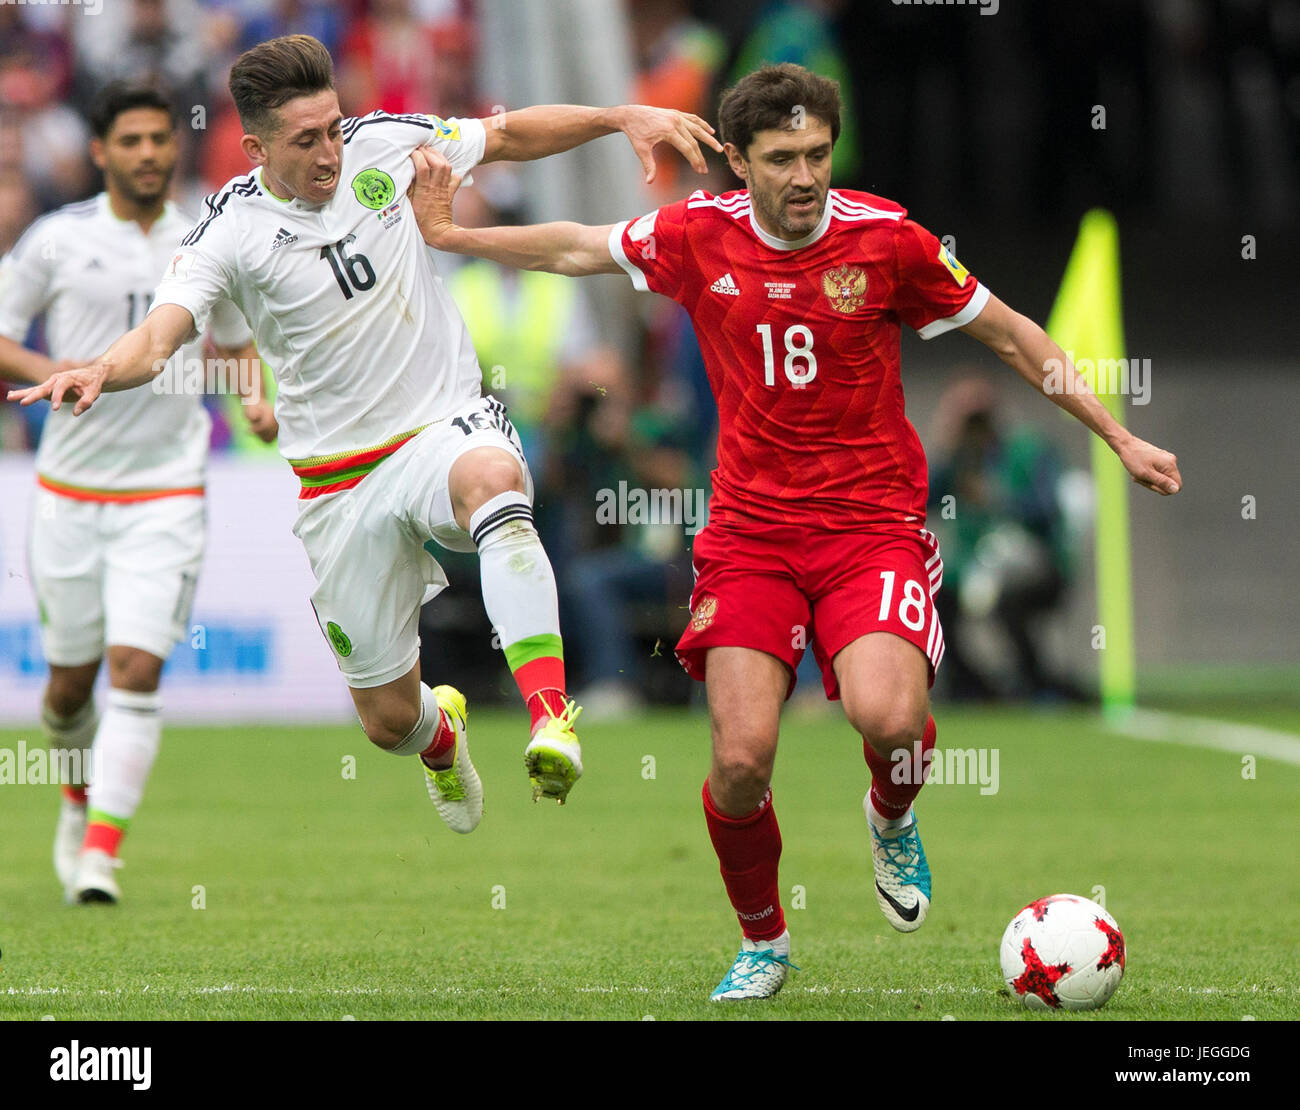 Kazan, Russia. 24th June, 2017. Hector Herrera(C) of Mexico vies with Yury Zhirkov(R) of Russia during group A match between Russia and Mexico at the 2017 FIFA Confederations Cup in Kazan, Russia, on June 24, 2017. Mexico won 2-1. Credit: Bai Xueqi/Xinhua/Alamy Live News Stock Photo